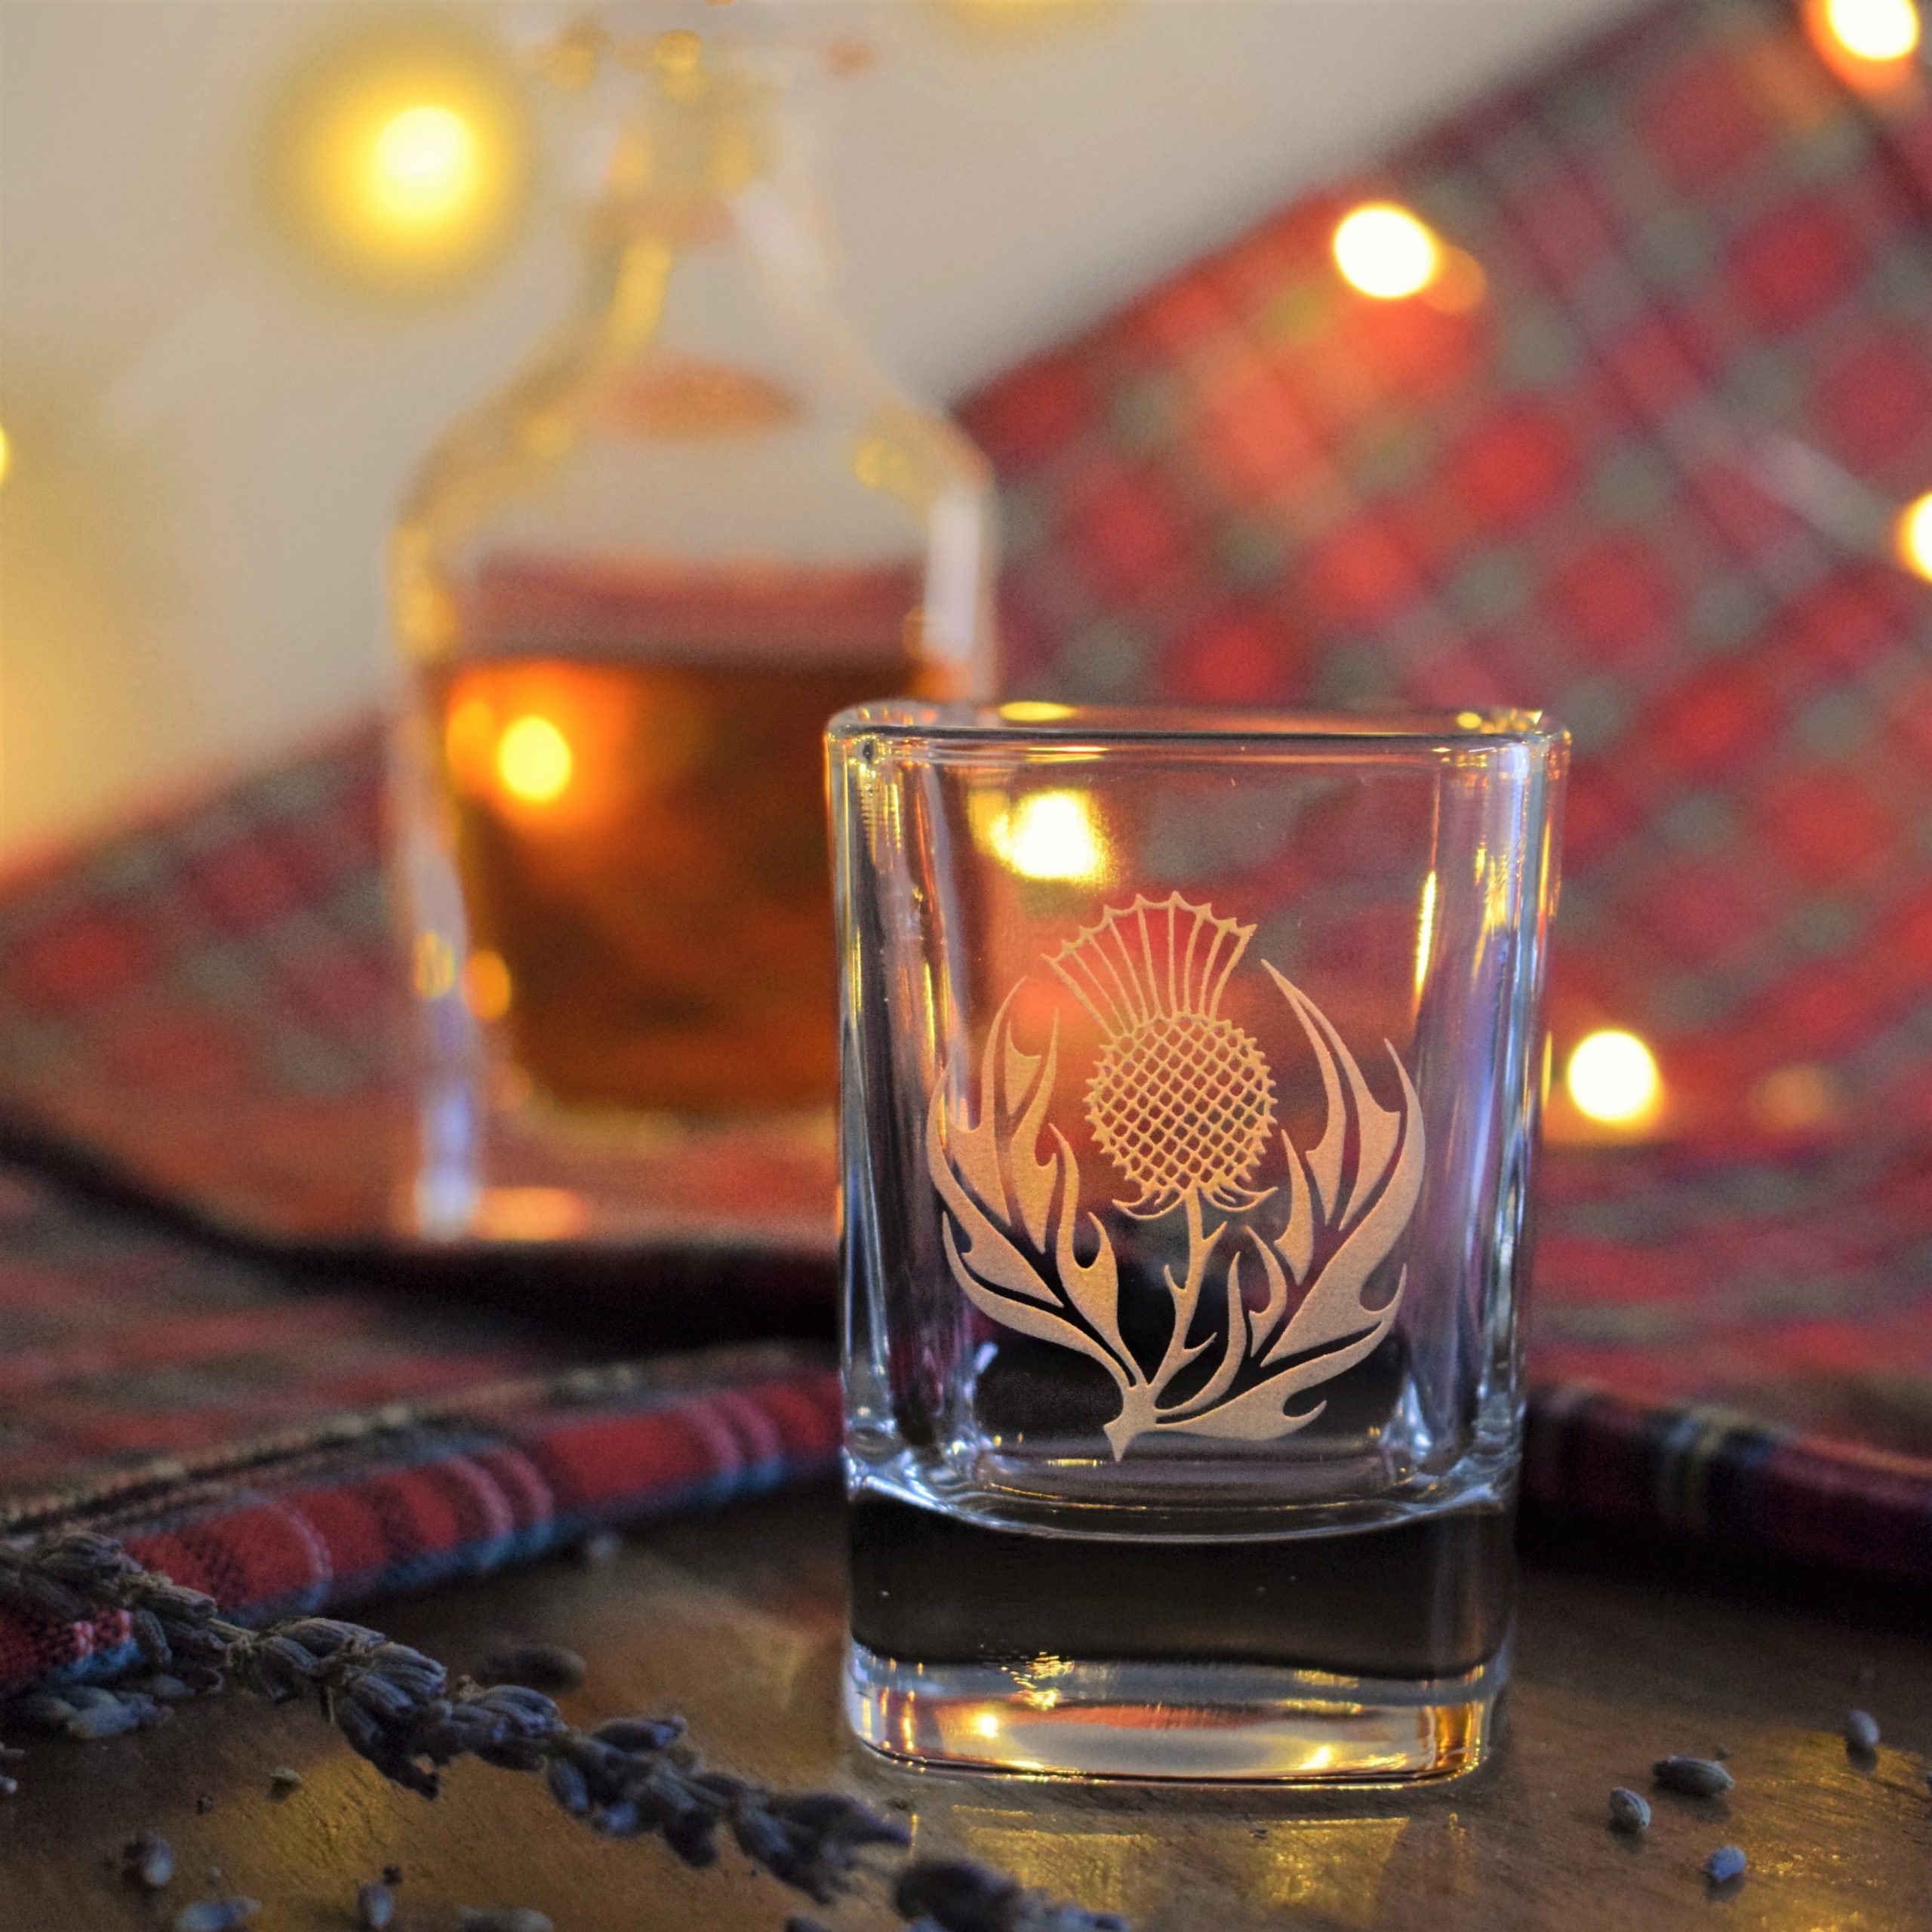 Square Dram Thistle with Nightcap decanter in background